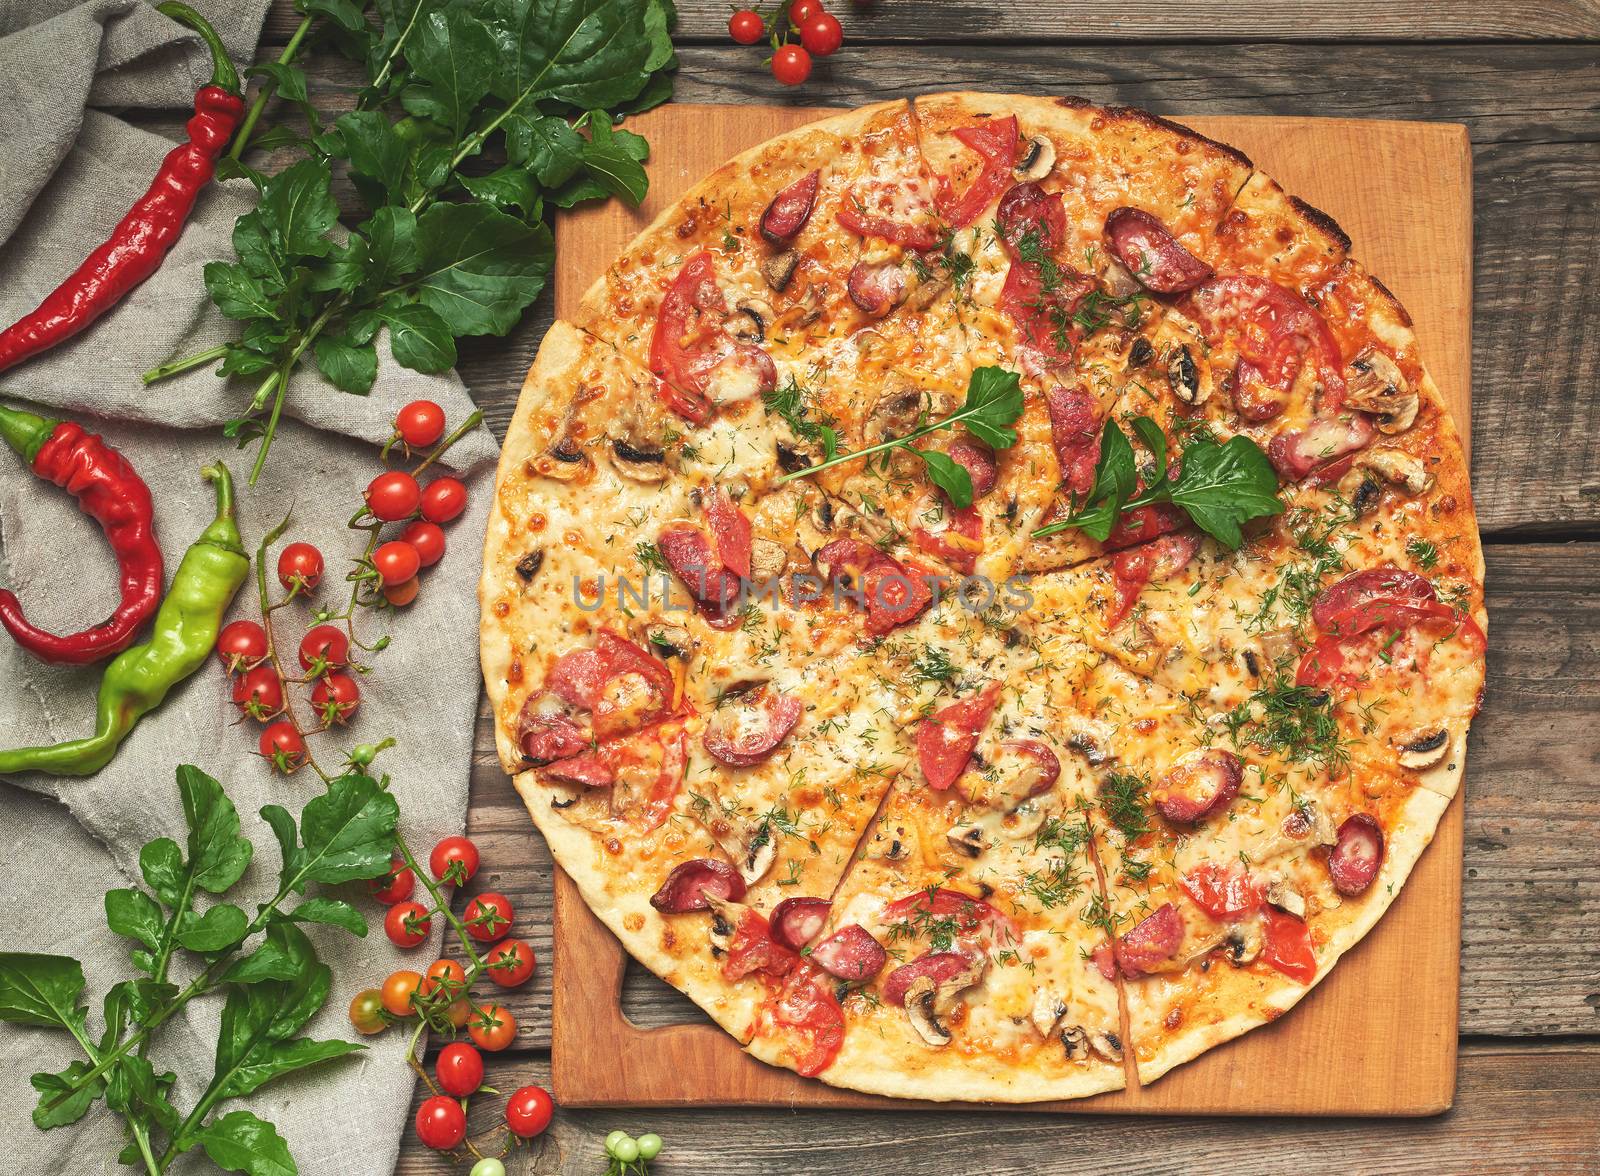 baked round pizza with smoked sausages, mushrooms, tomatoes, cheese and arugula leaves, food is cut in portions, wooden table 